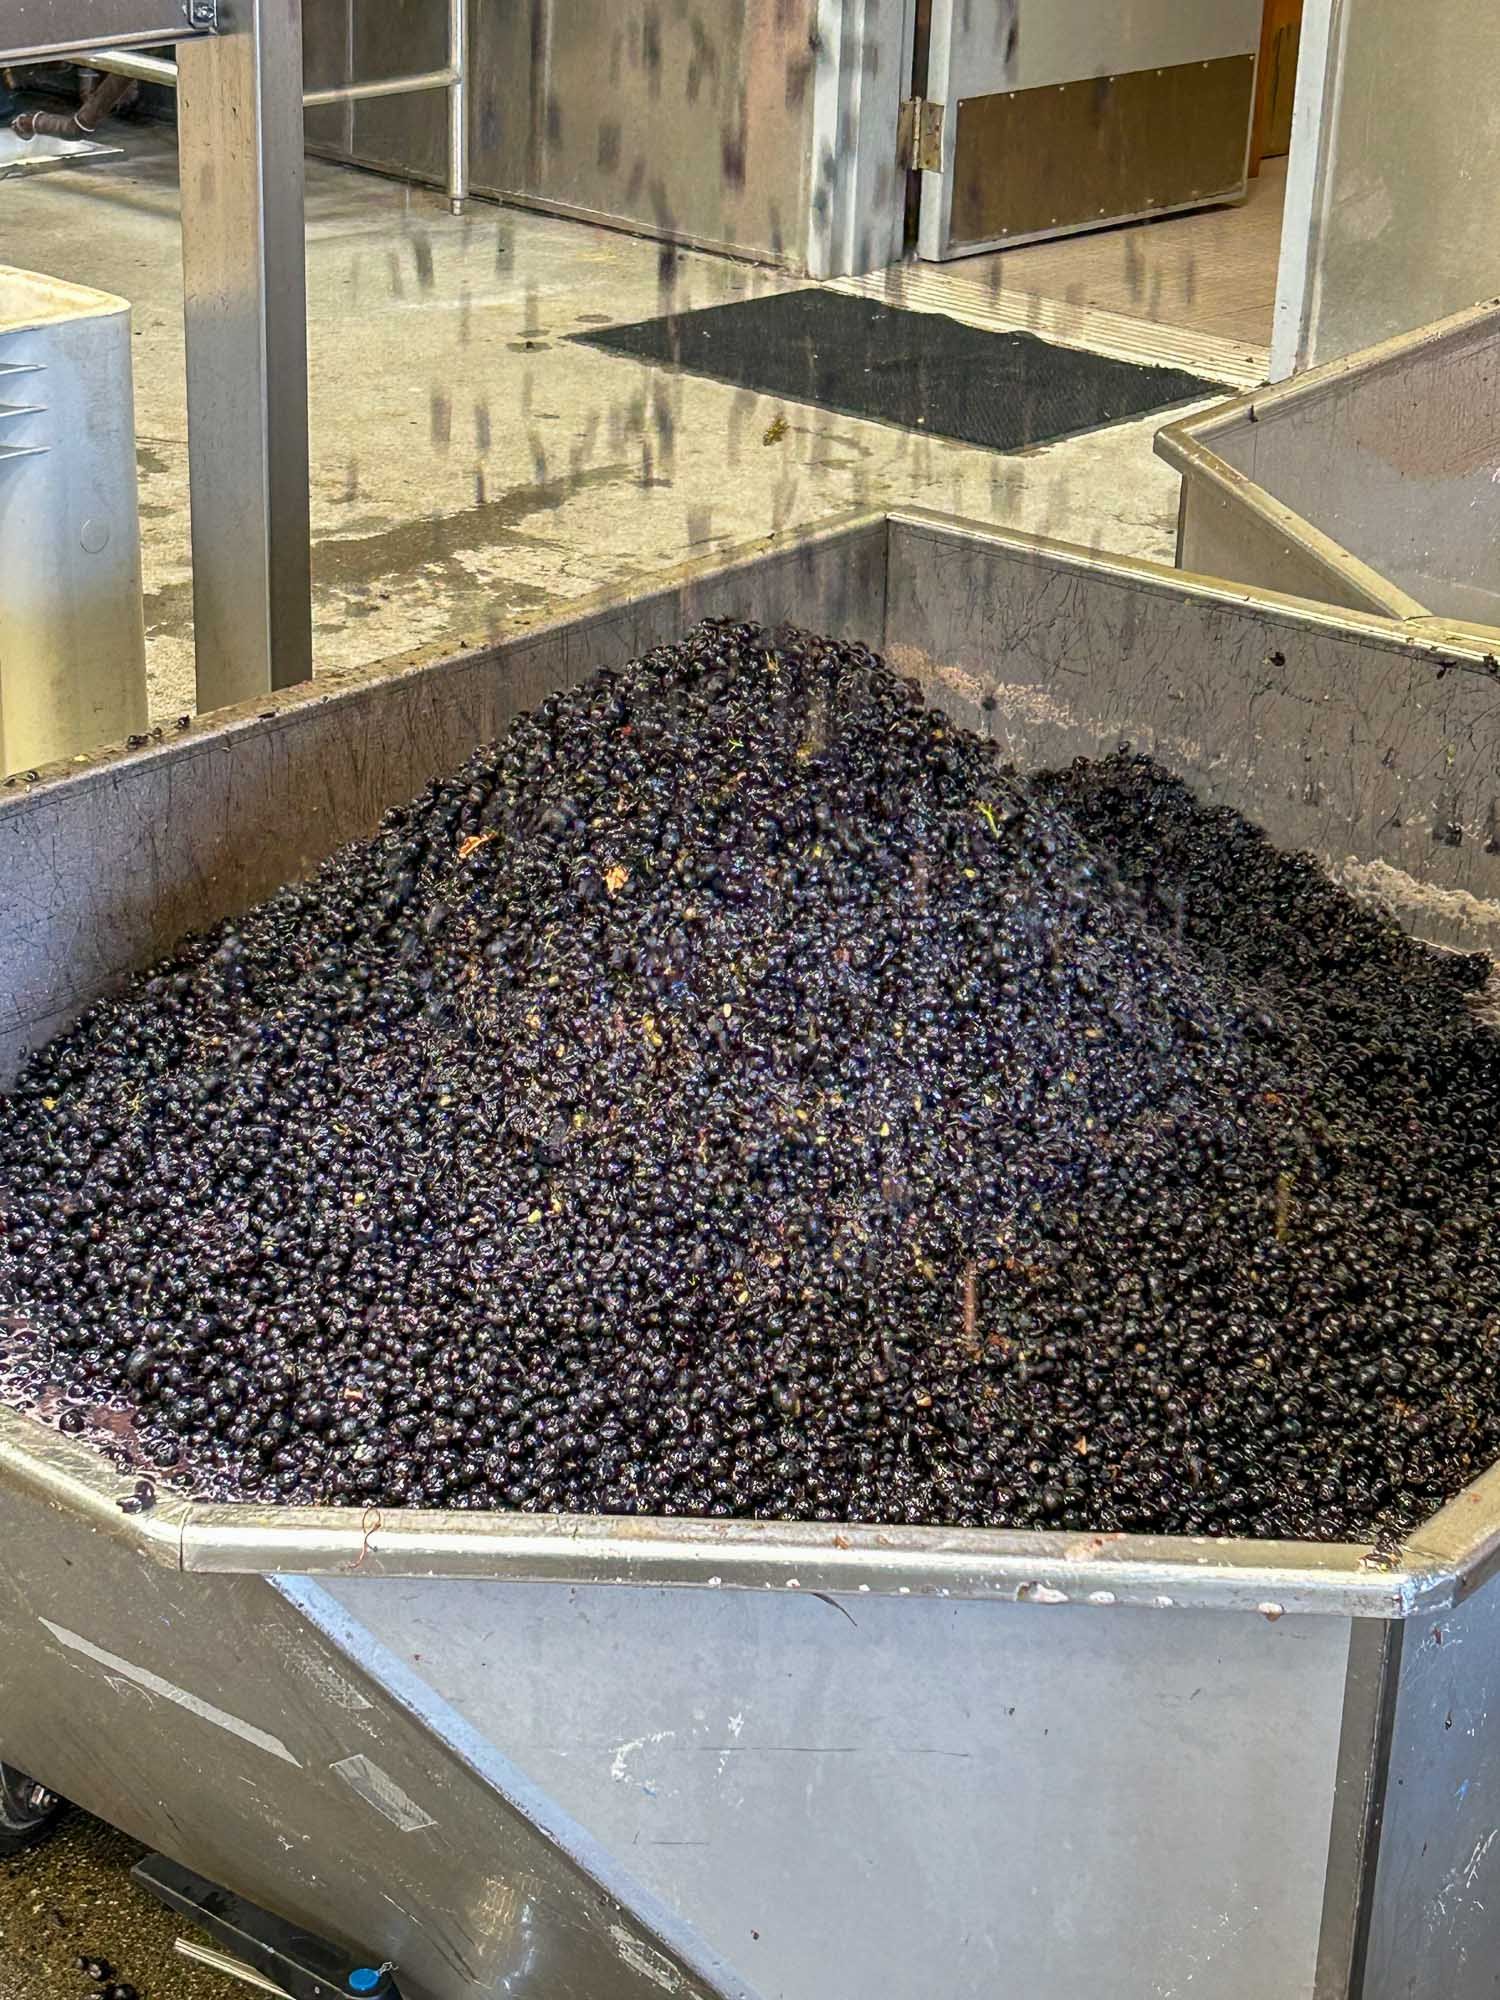 Berries that will make it to the barrel